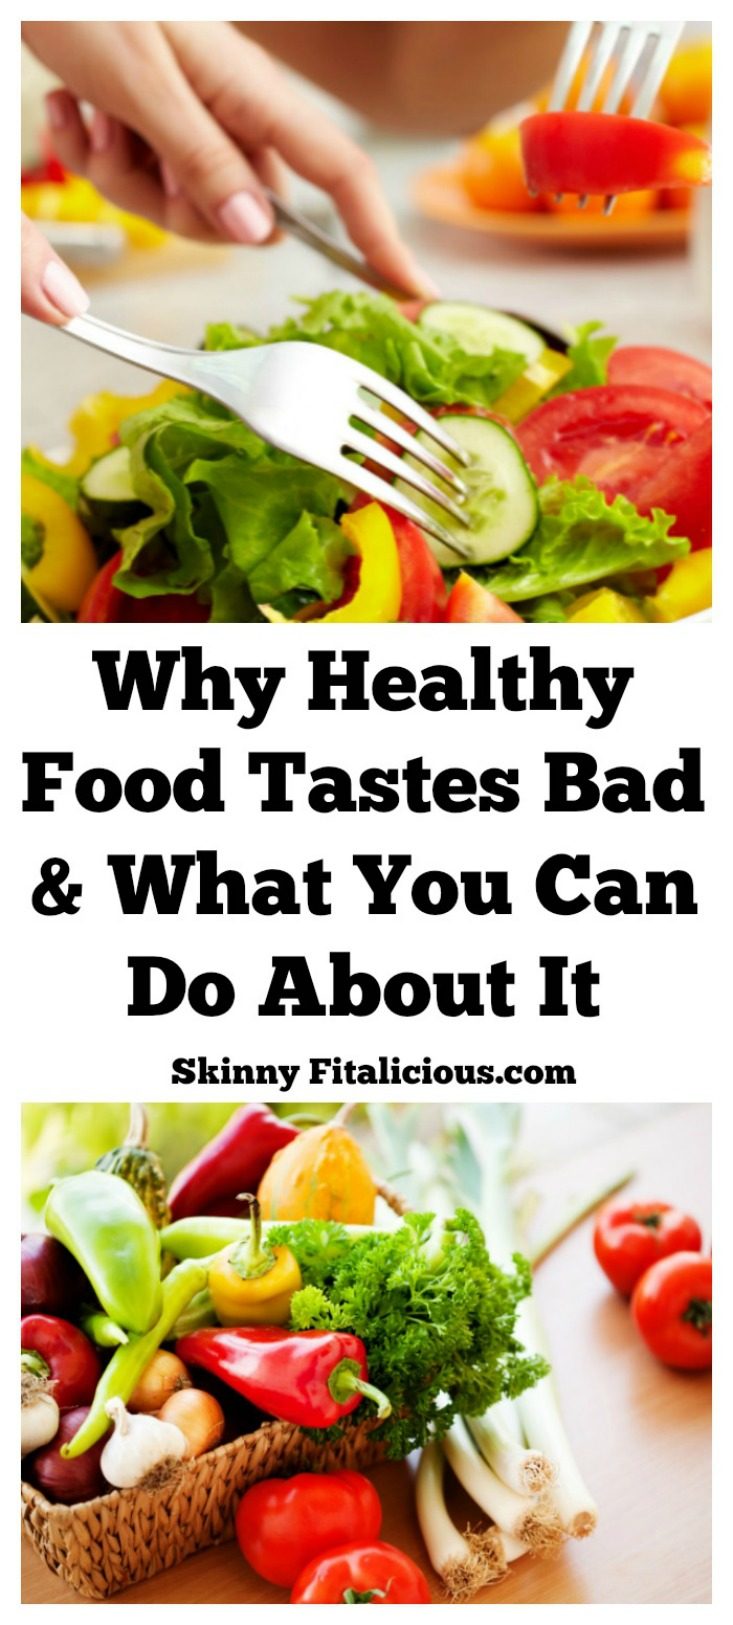 There's no doubt healthy food tastes good. Not that many people are faking liking it. What you have to ask yourself is why healthy food tastes bad to you?